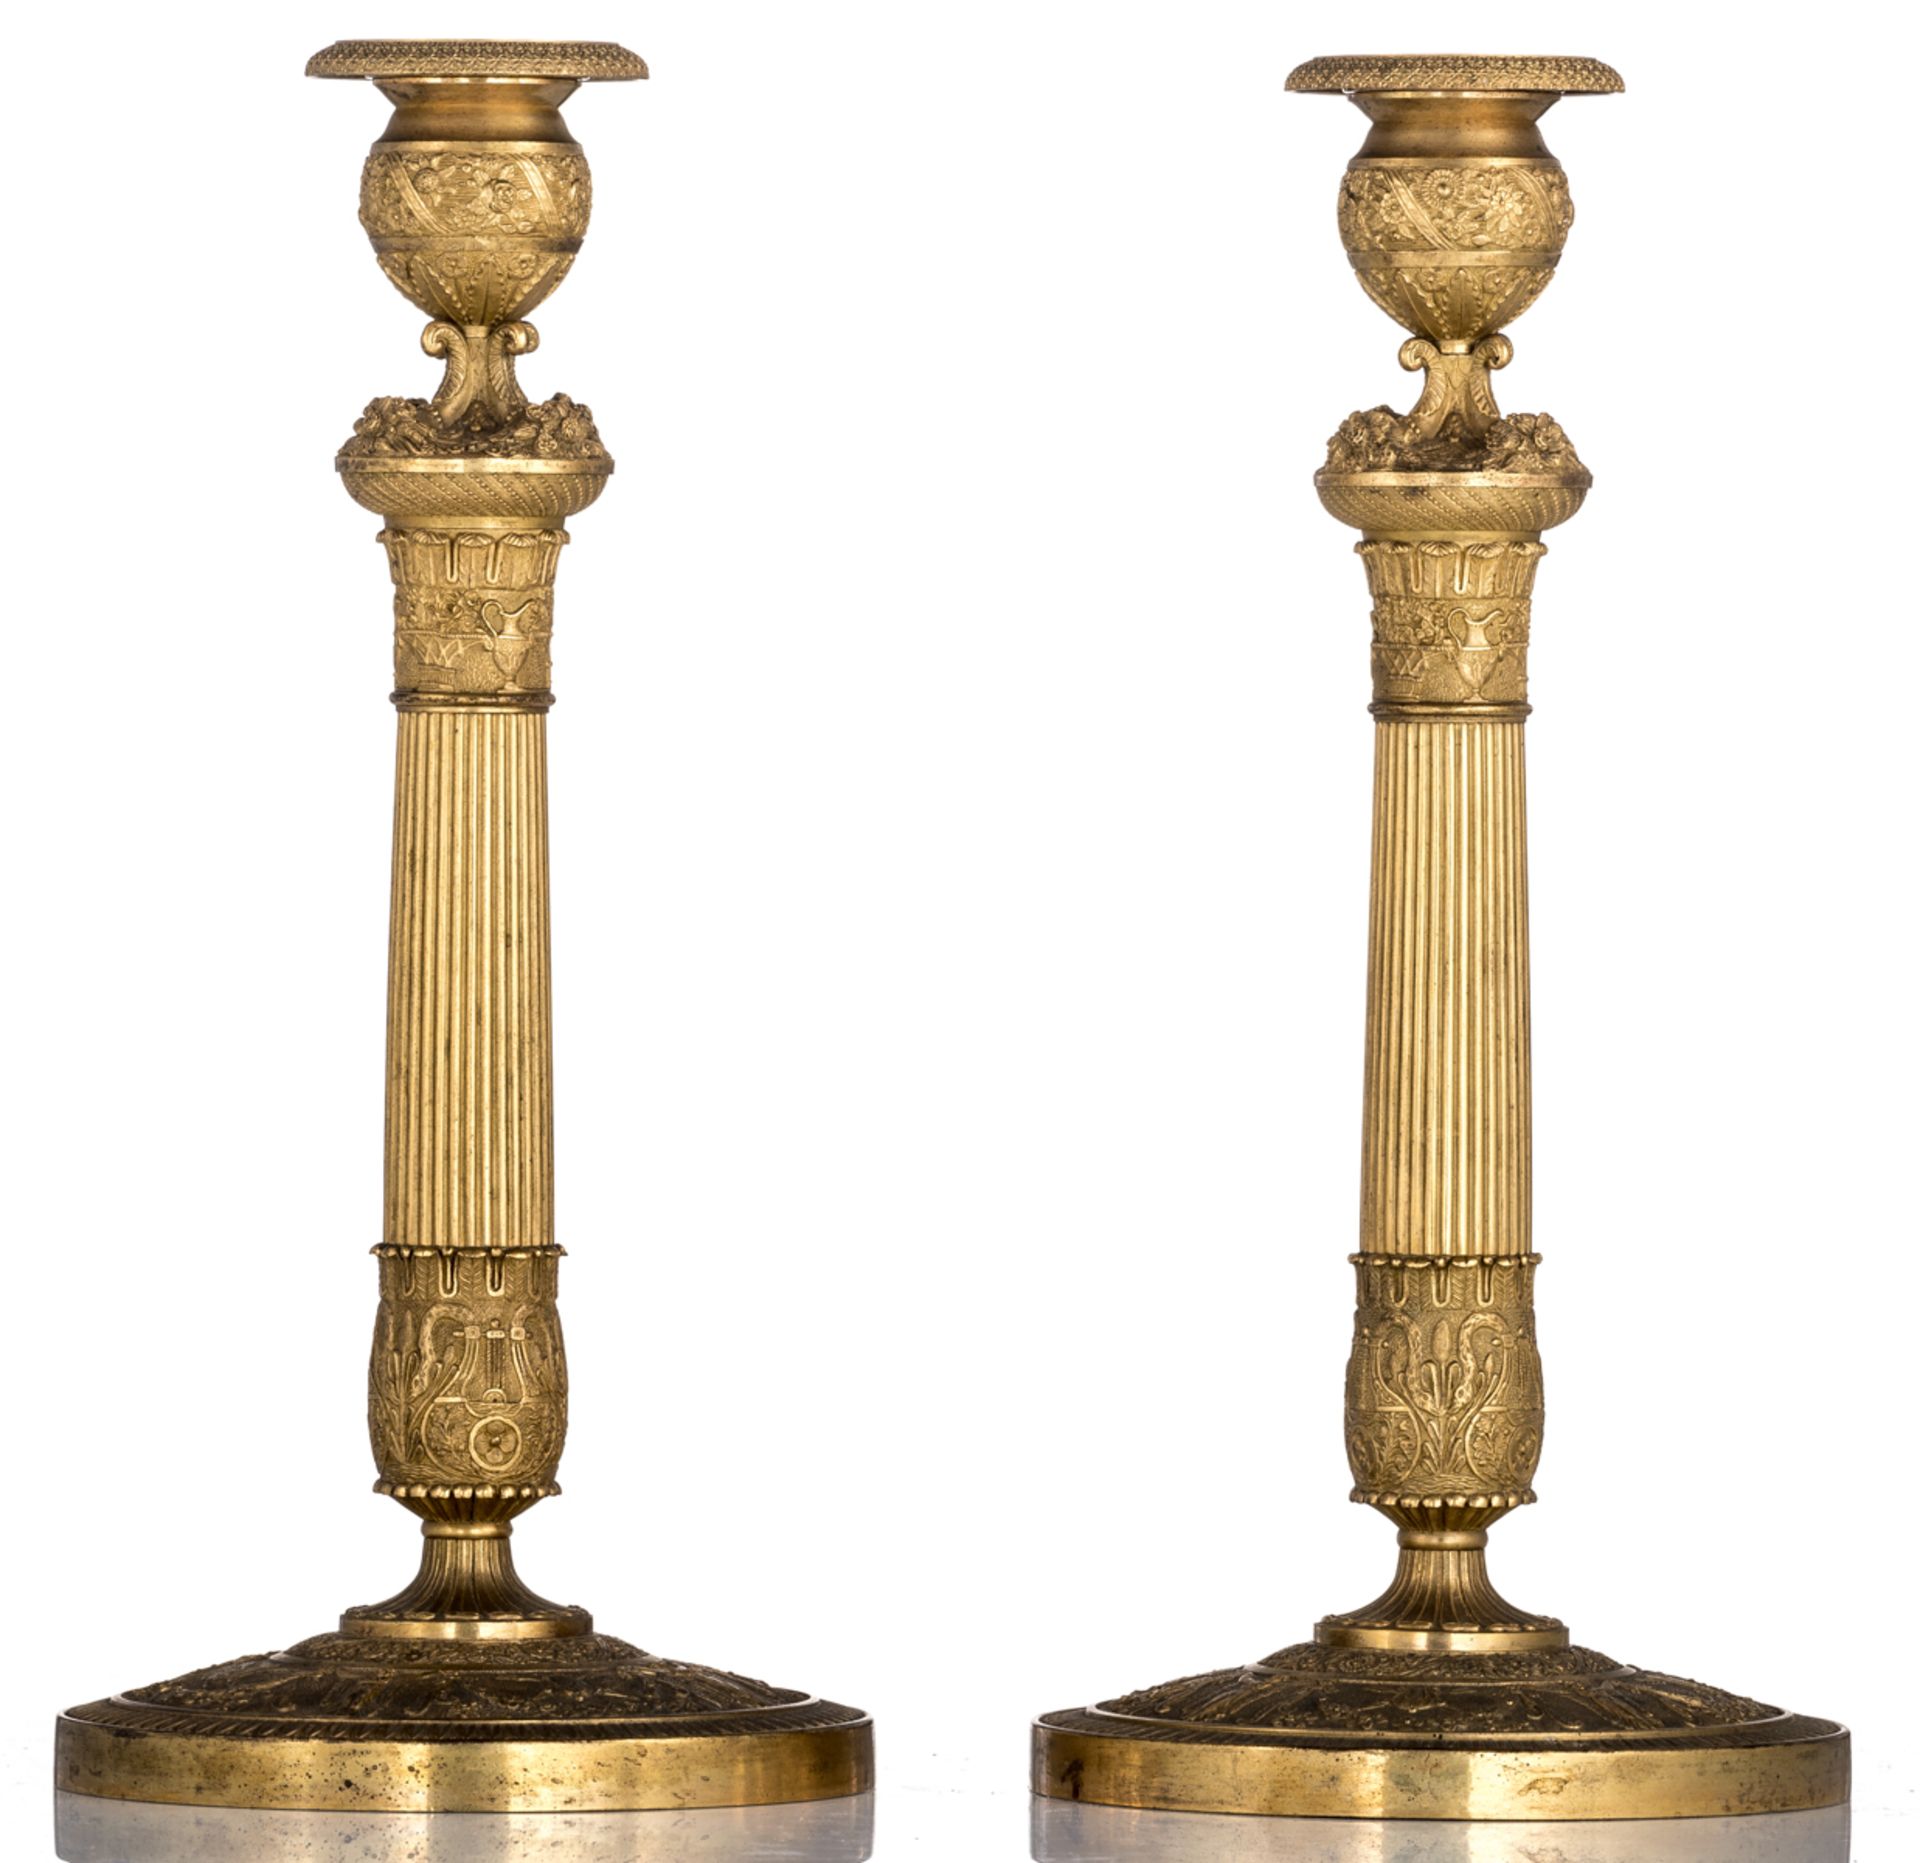 A fine pair of gilt bronze neoclassical candlesticks, first quarter of the 19thC, H 33,5 cm, ex Soth - Image 2 of 6